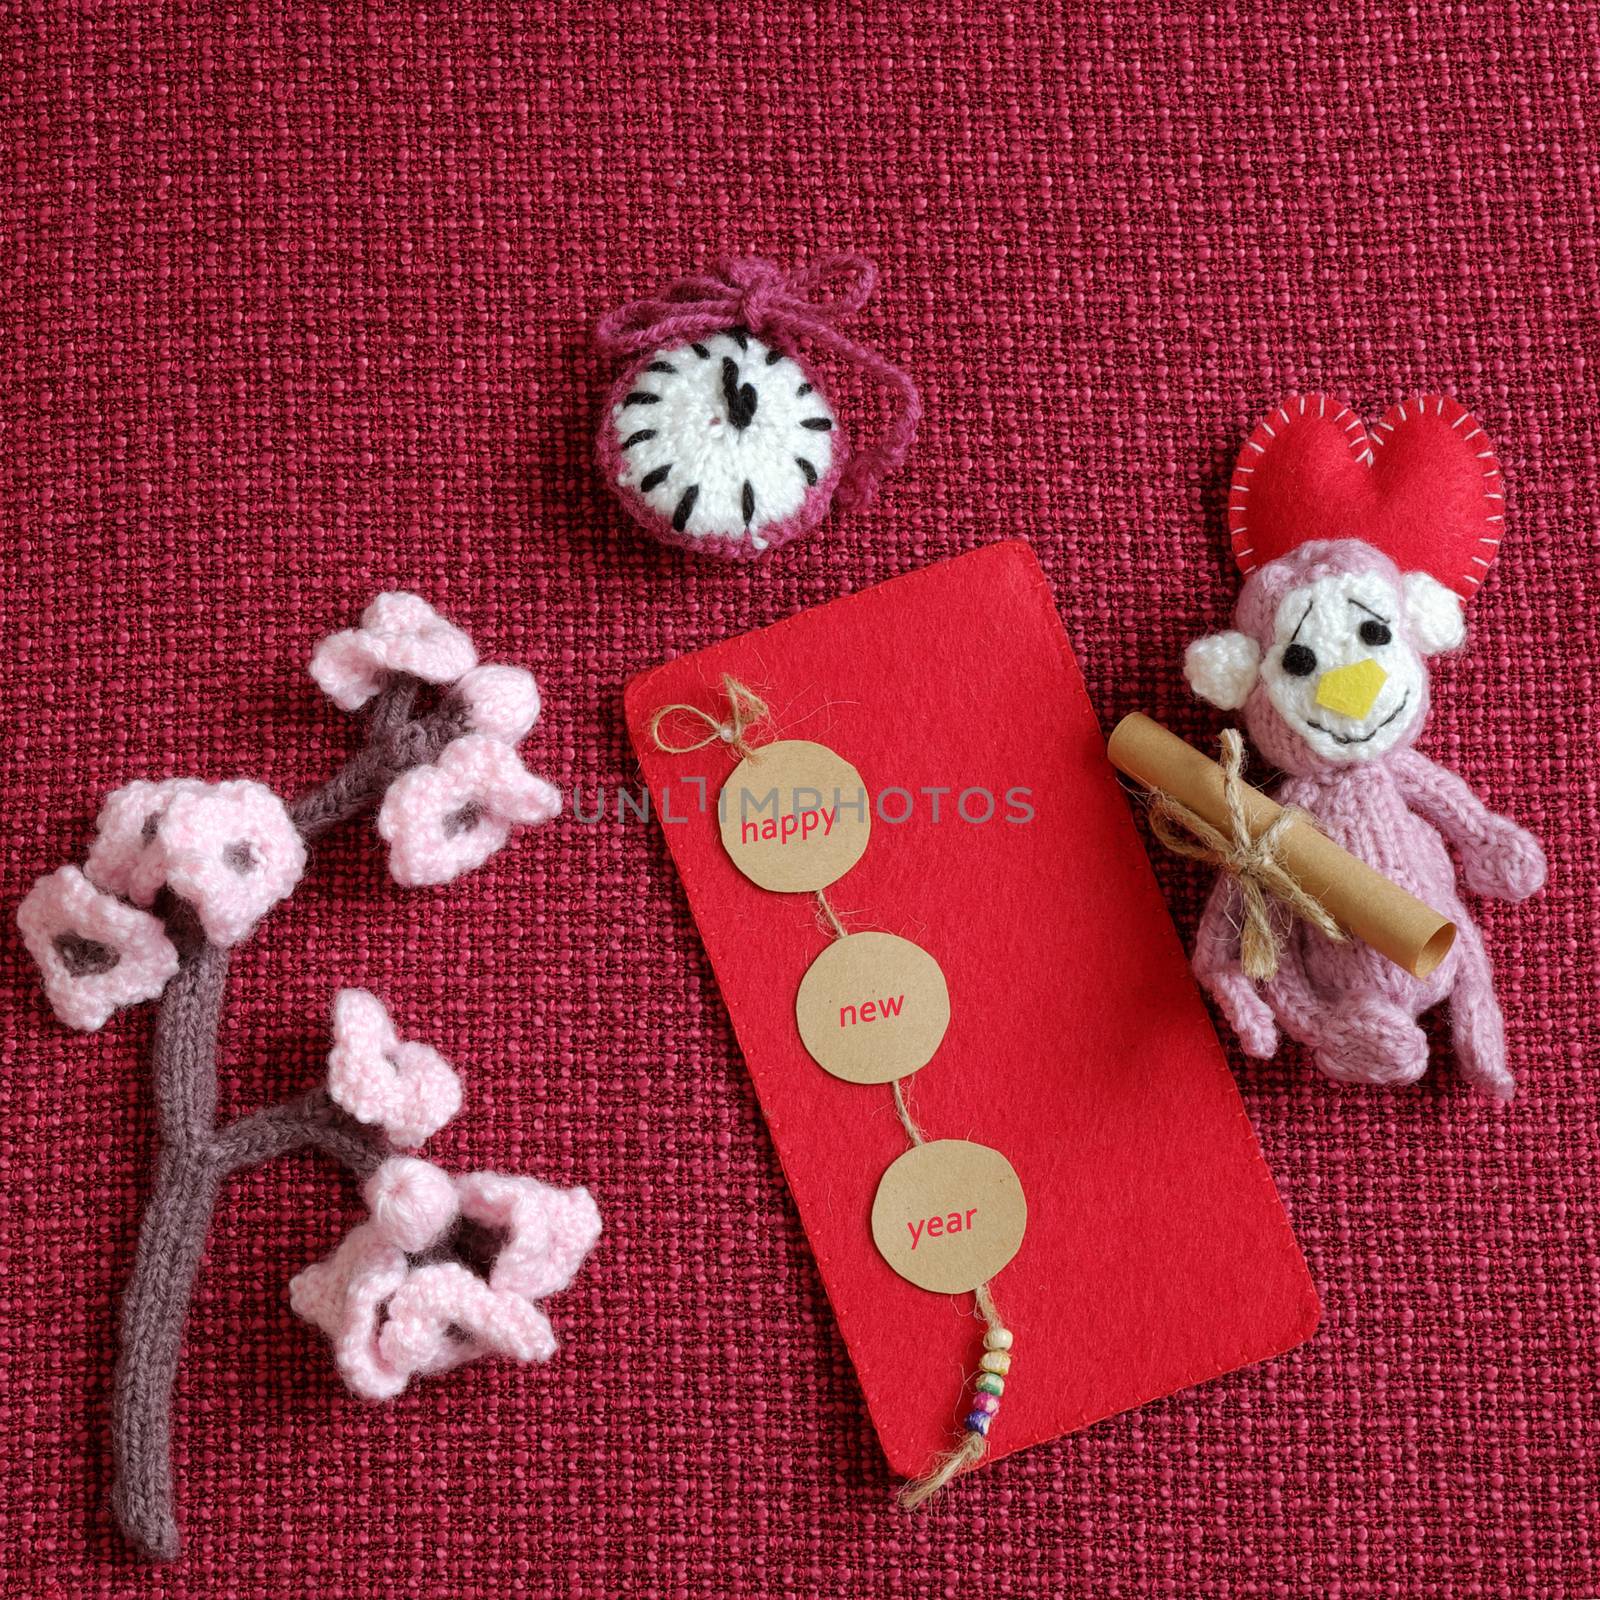 2016, year of monkey, handmade happy new year on red background, knitted monkey, funny stuffed animal, knit flower from yarn, red envelope for lucky money, sign for Vietnam Tet